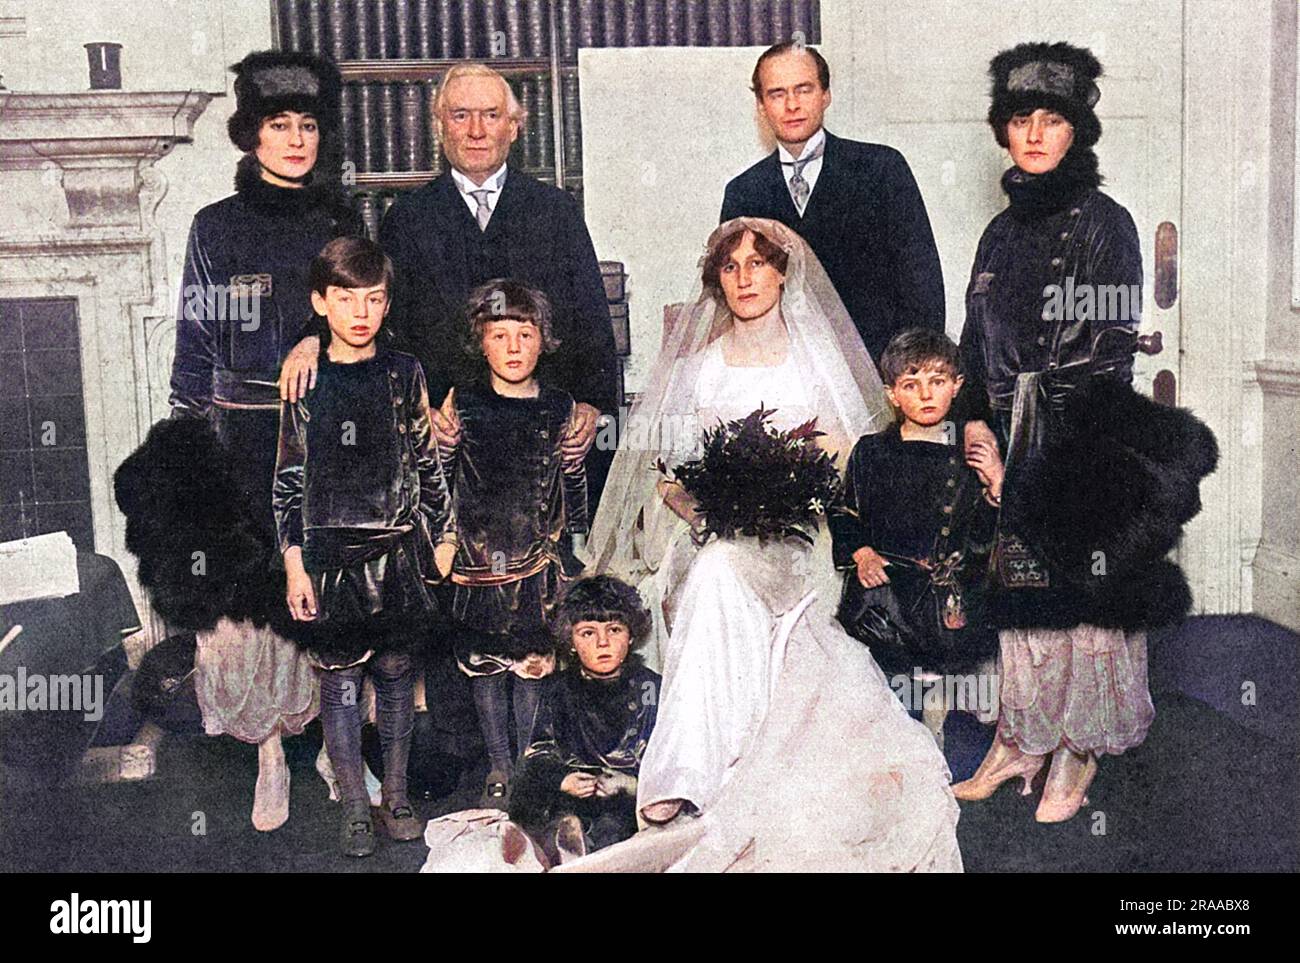 Wedding group at the marriage of Violet Asquith to Maurice Bonham-Carter.  Helen Violet Bonham Carter, Baroness Asquith of Yarnbury, DBE (15 April 1887 û 19 February 1969) was a British politician and diarist. She was the daughter of H. H. Asquith, Prime Minister from 1908û1916, and later became active in Liberal politics herself, being a leading opponent of appeasement, standing for Parliament and being made a life peer. She was also involved in arts and literature. Her illuminating diaries cover her father's premiership before and during World War I and continue until the 1960s.  She was a c Stock Photo